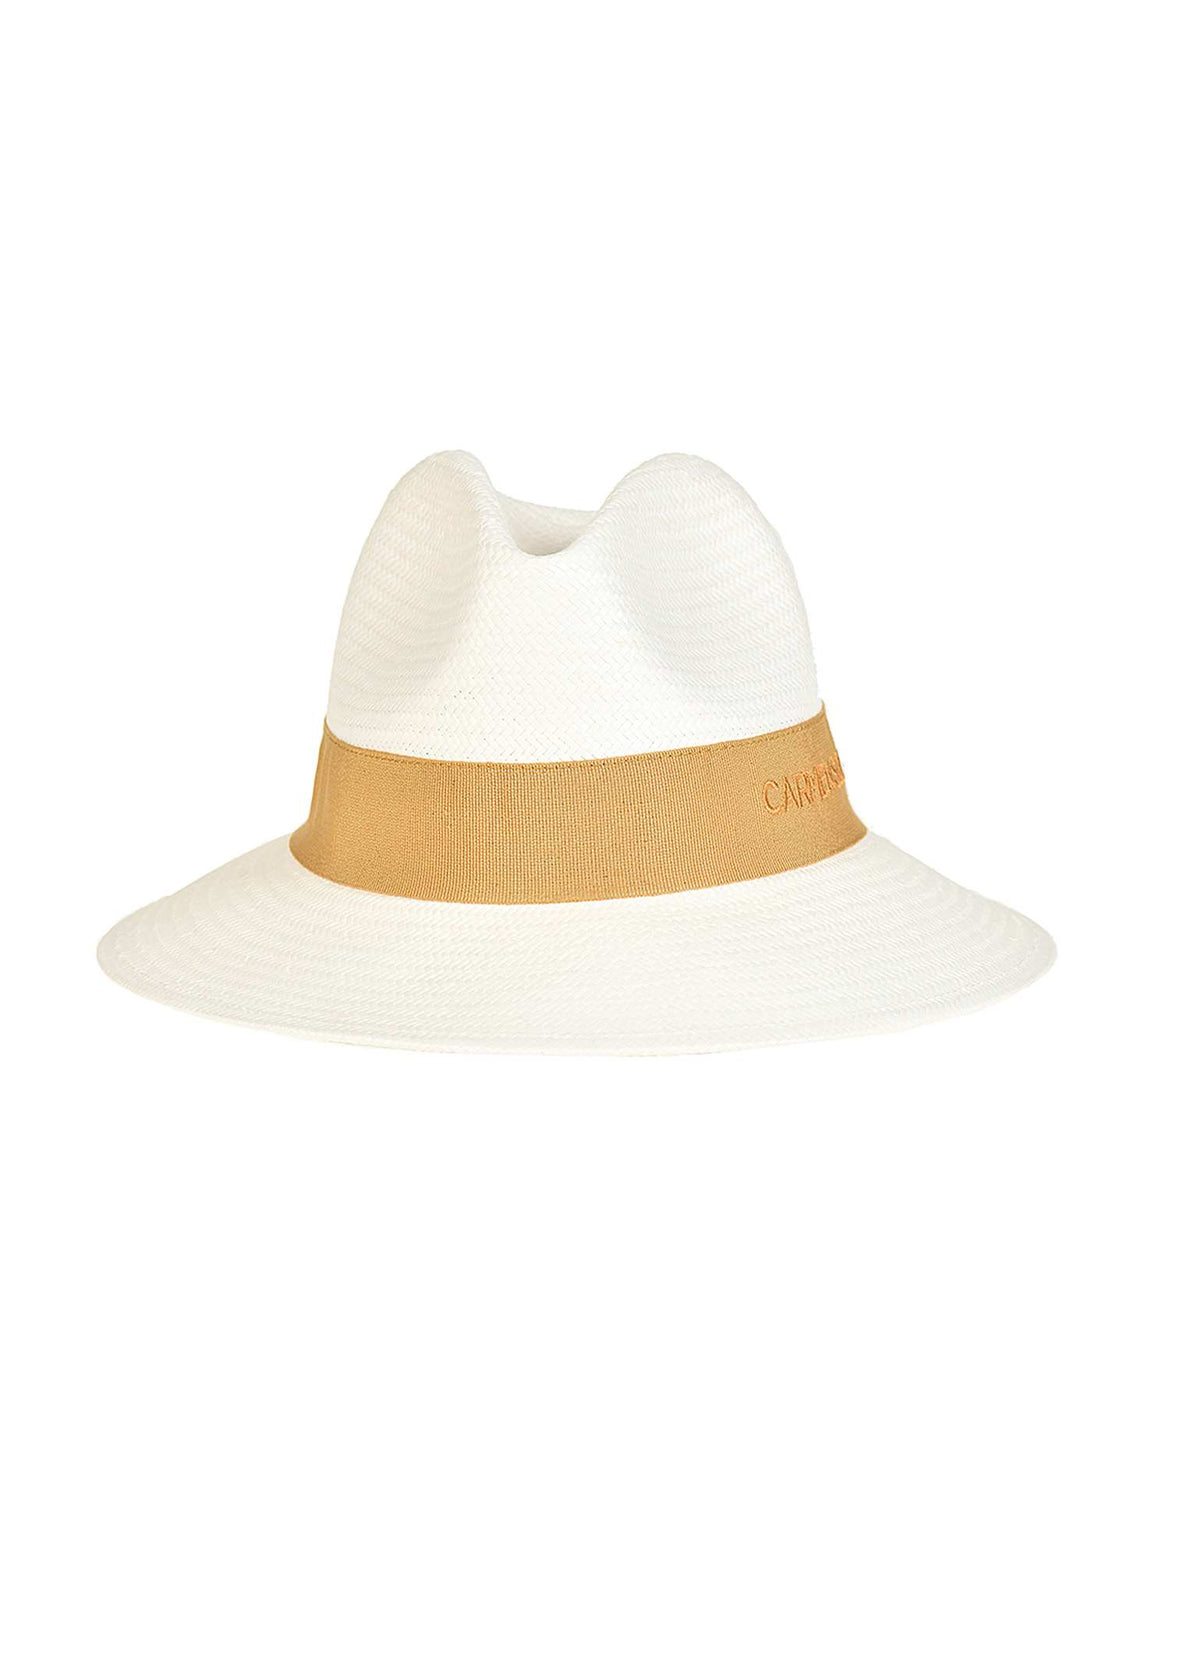 dolores 2 packable fedora hat for women  in color nude from Carmen Sol